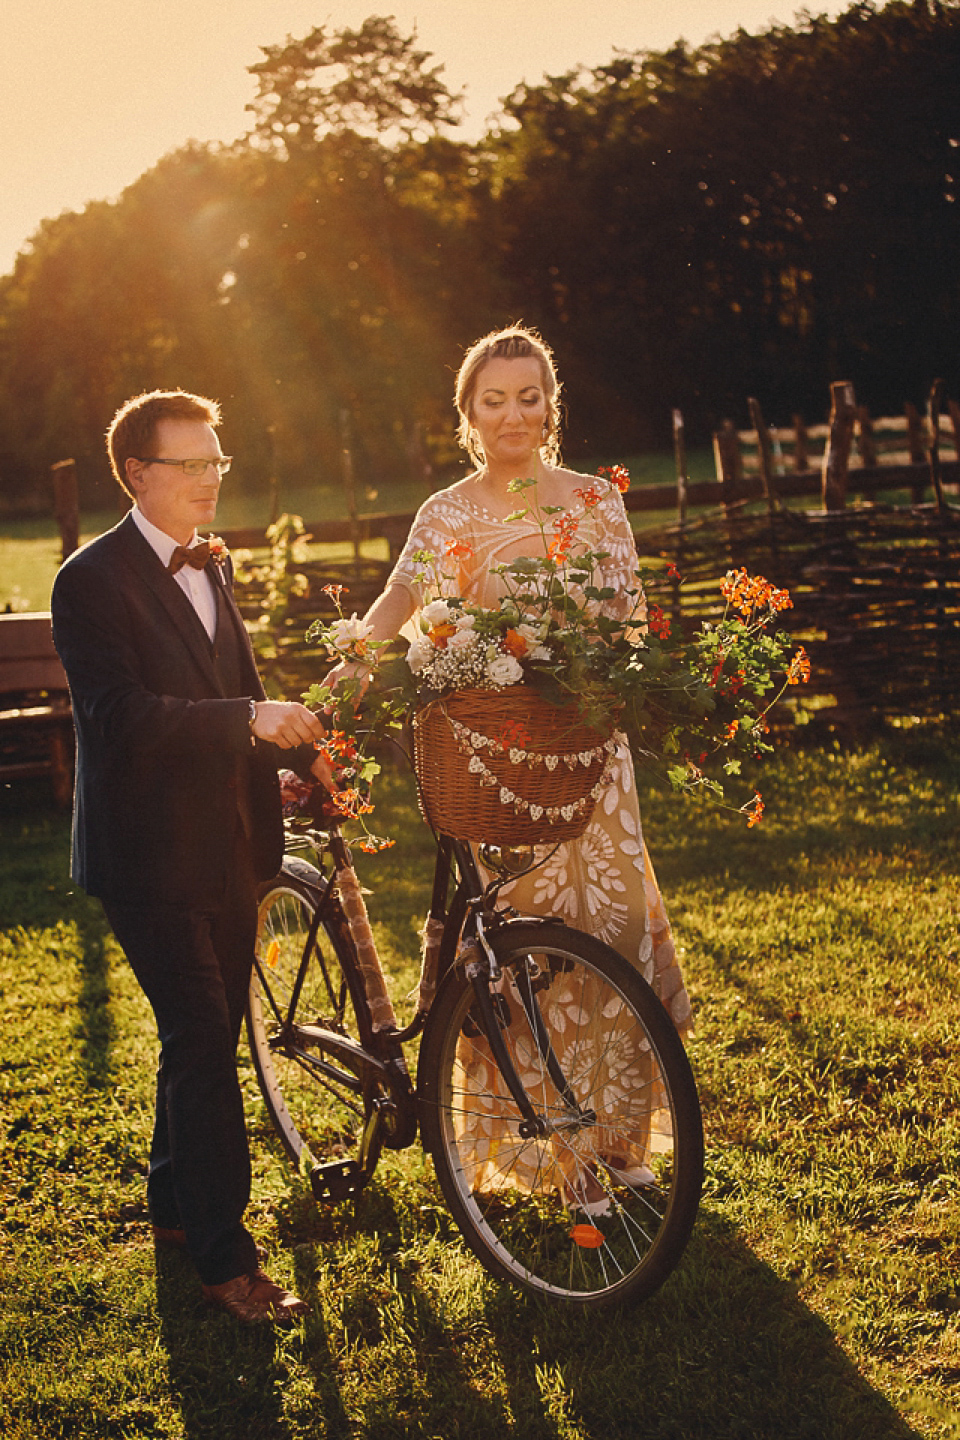 A Rue de Seine gown for a rustic, outdoor wedding in Poland. Photography by Slawomir Gubula.